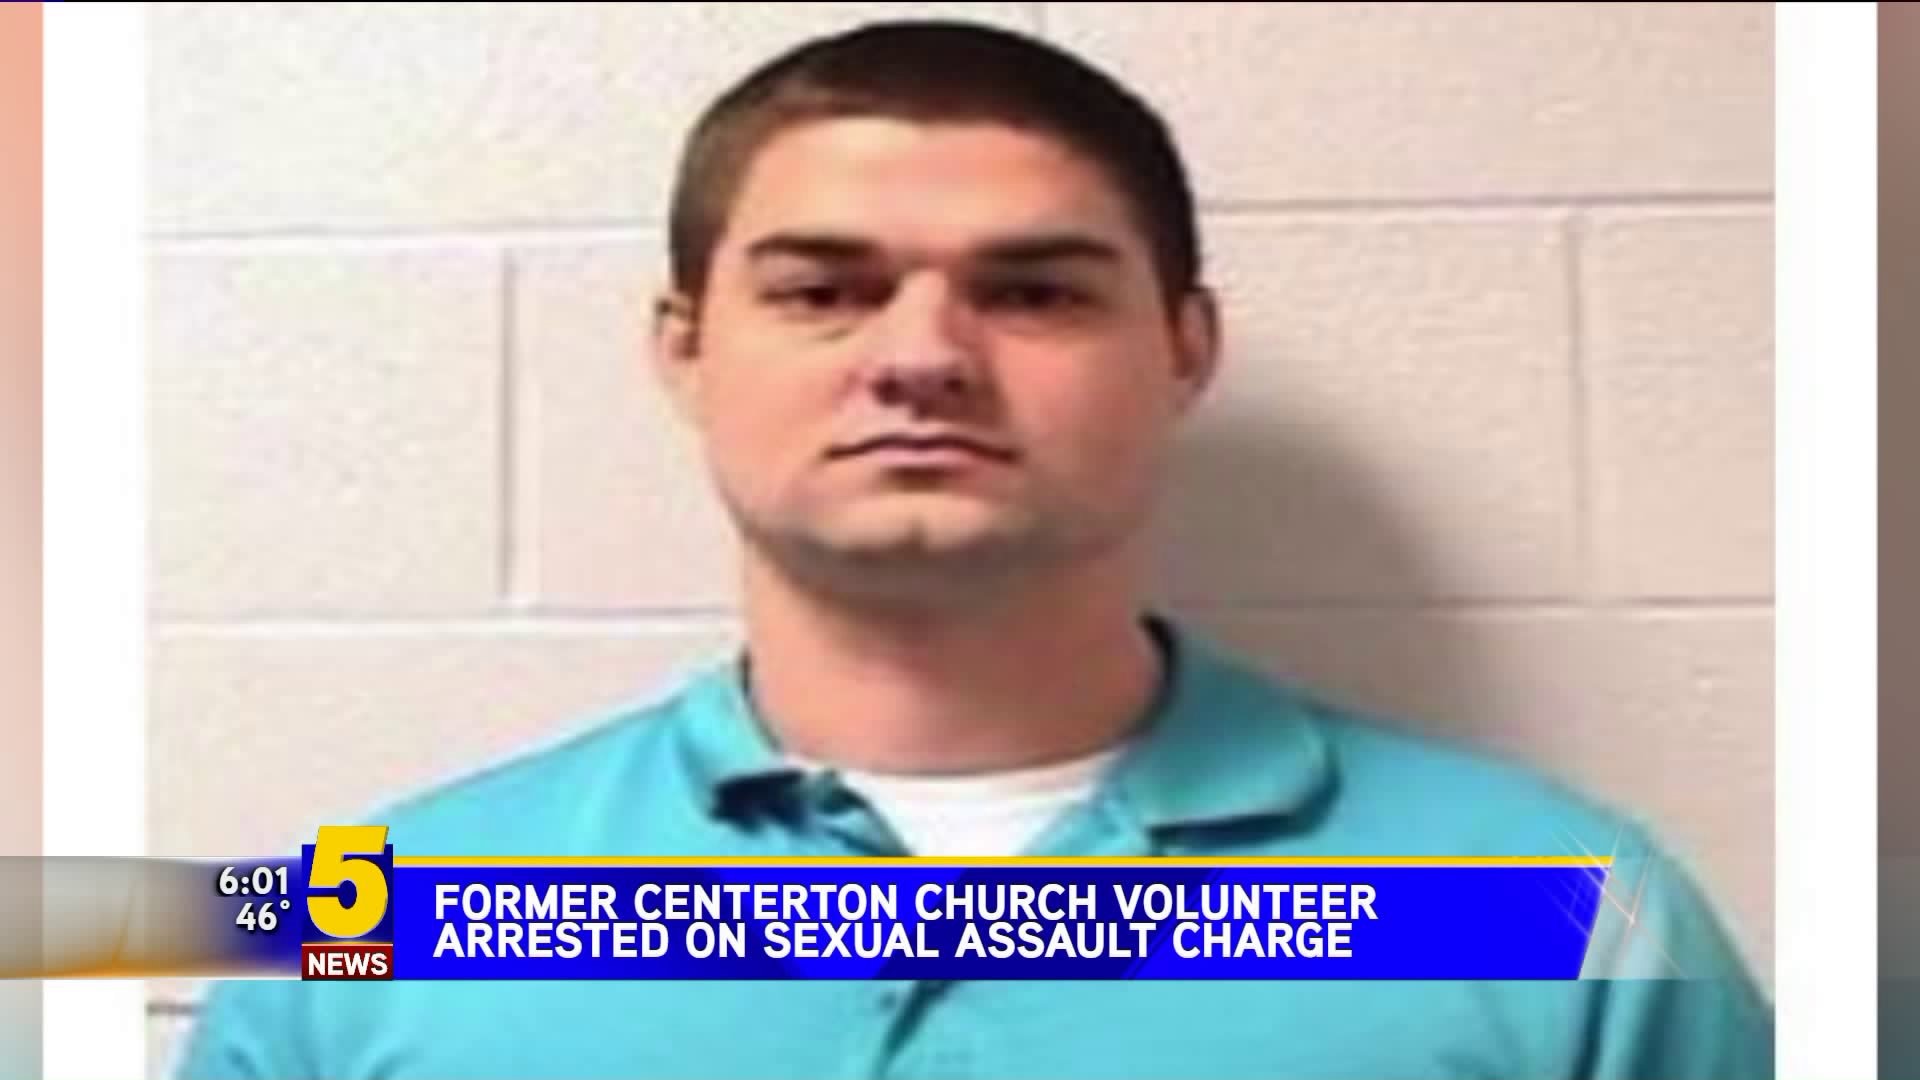 Former Centerton Church Volunteer Arrested On Sexual Assault Charge